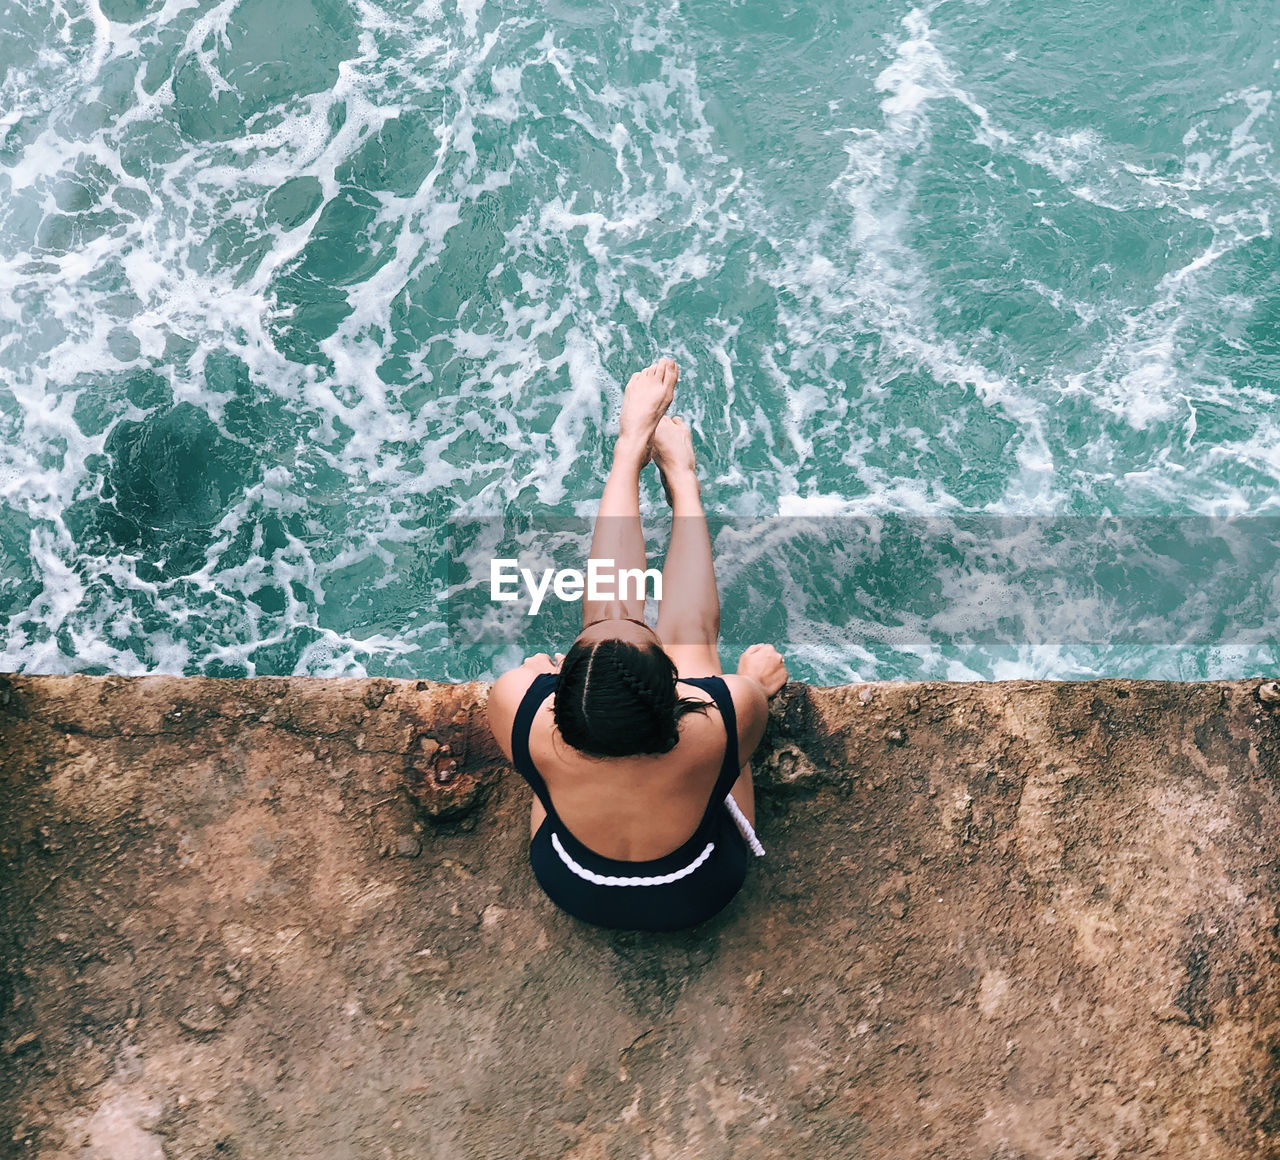 HIGH ANGLE VIEW OF PERSON RELAXING IN SEA